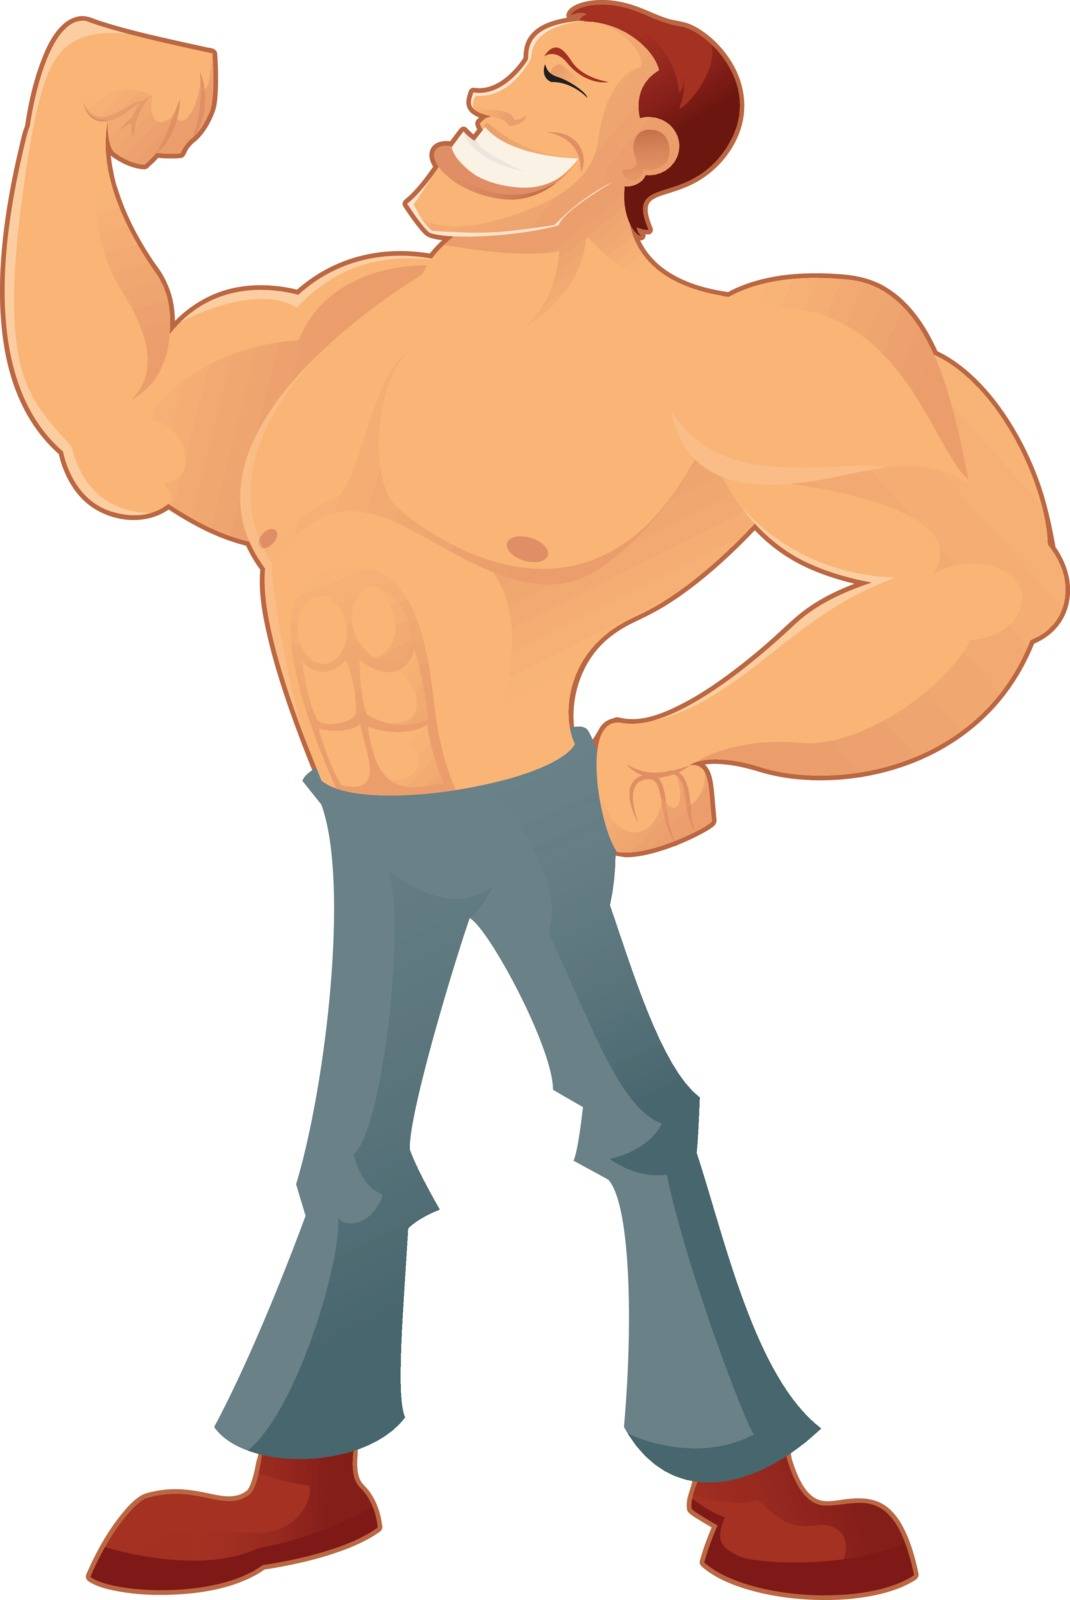 Muscleman by Amplion